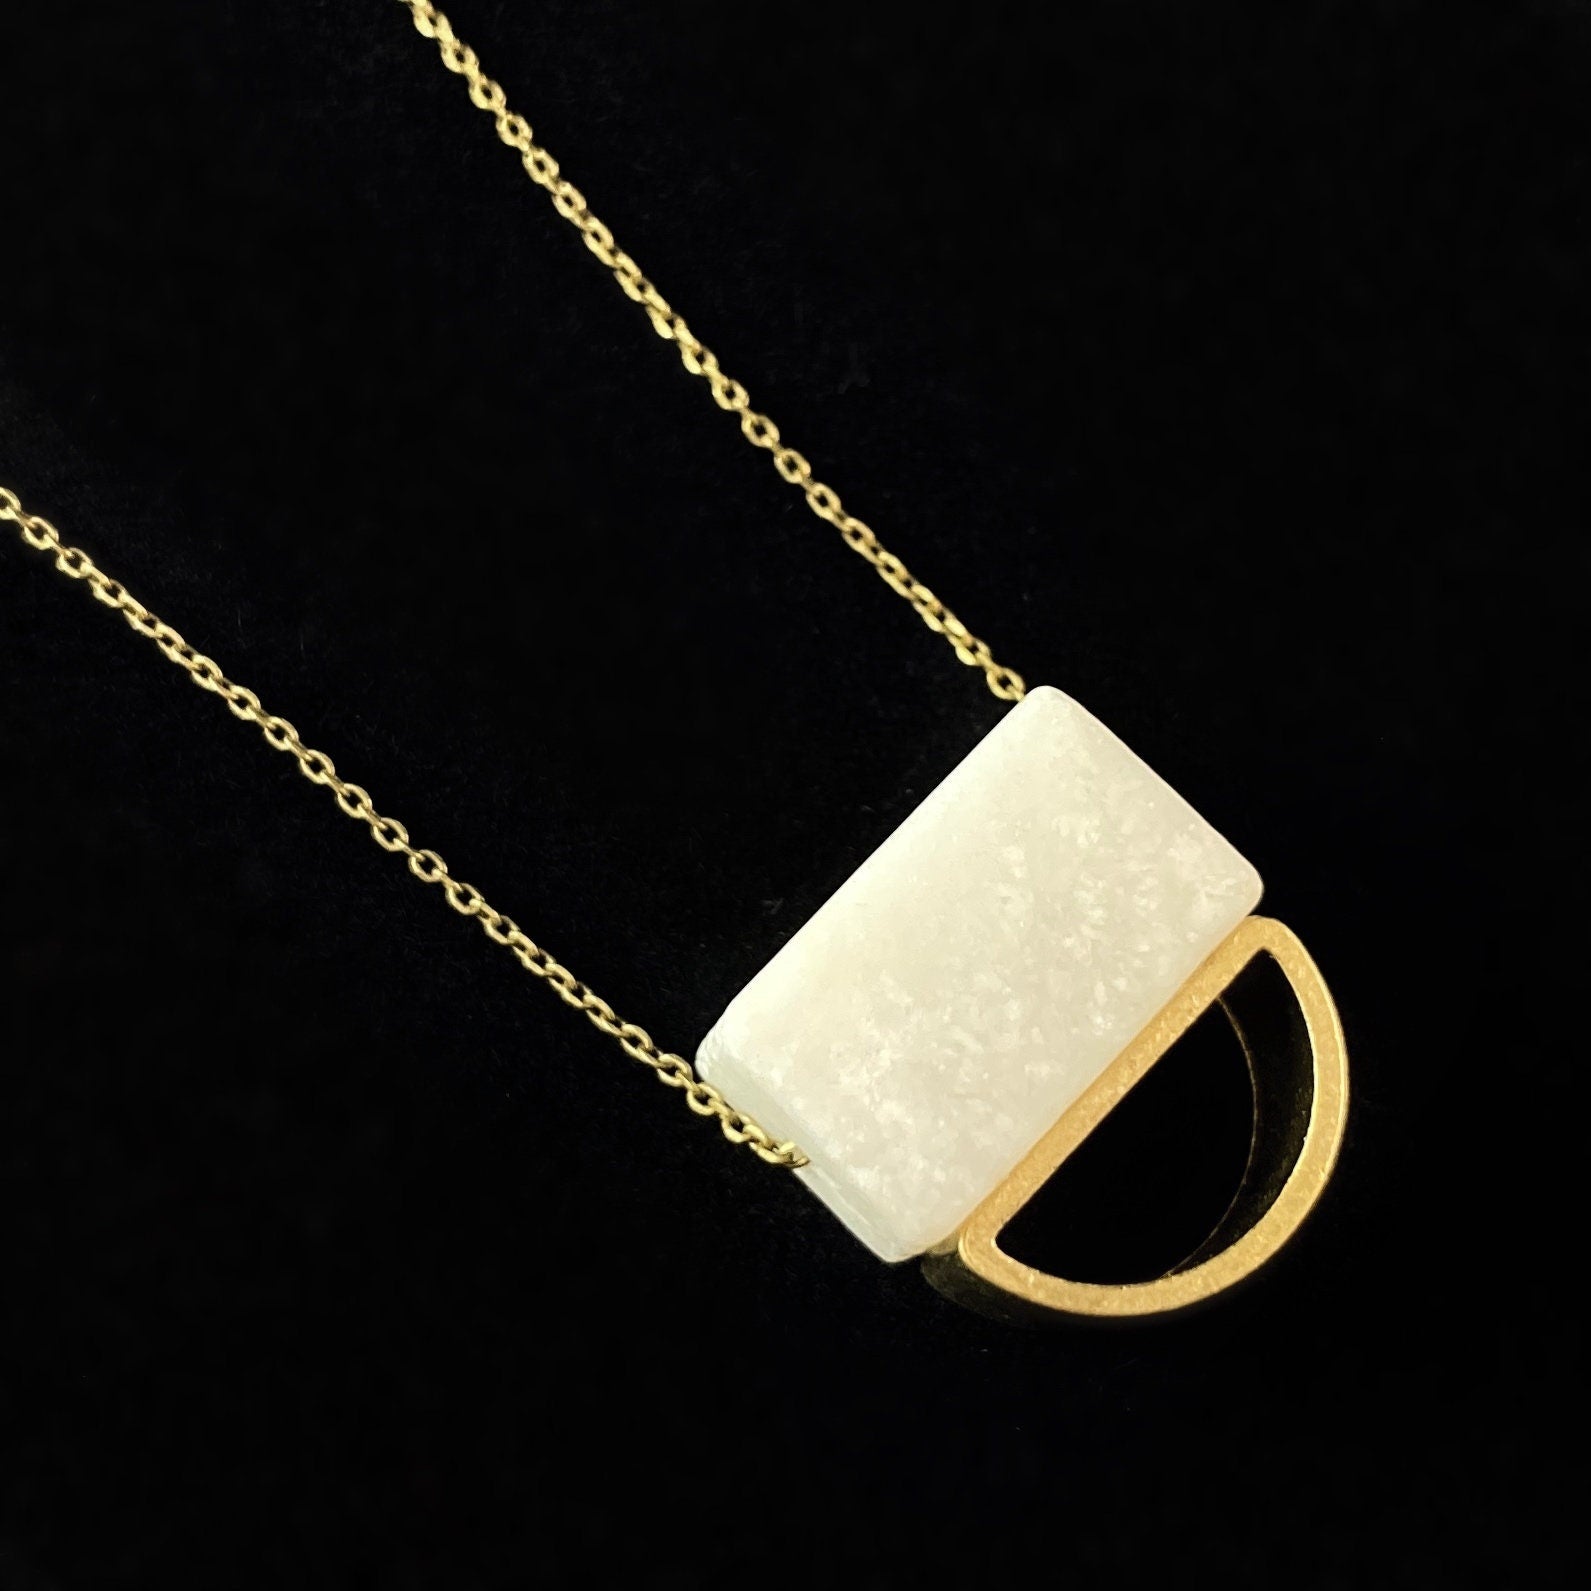 Gold Geometric Art Deco Pendant Necklace  - 18kt Gold Over Brass Necklace with Square Agate Bead, David Aubrey Jewelry